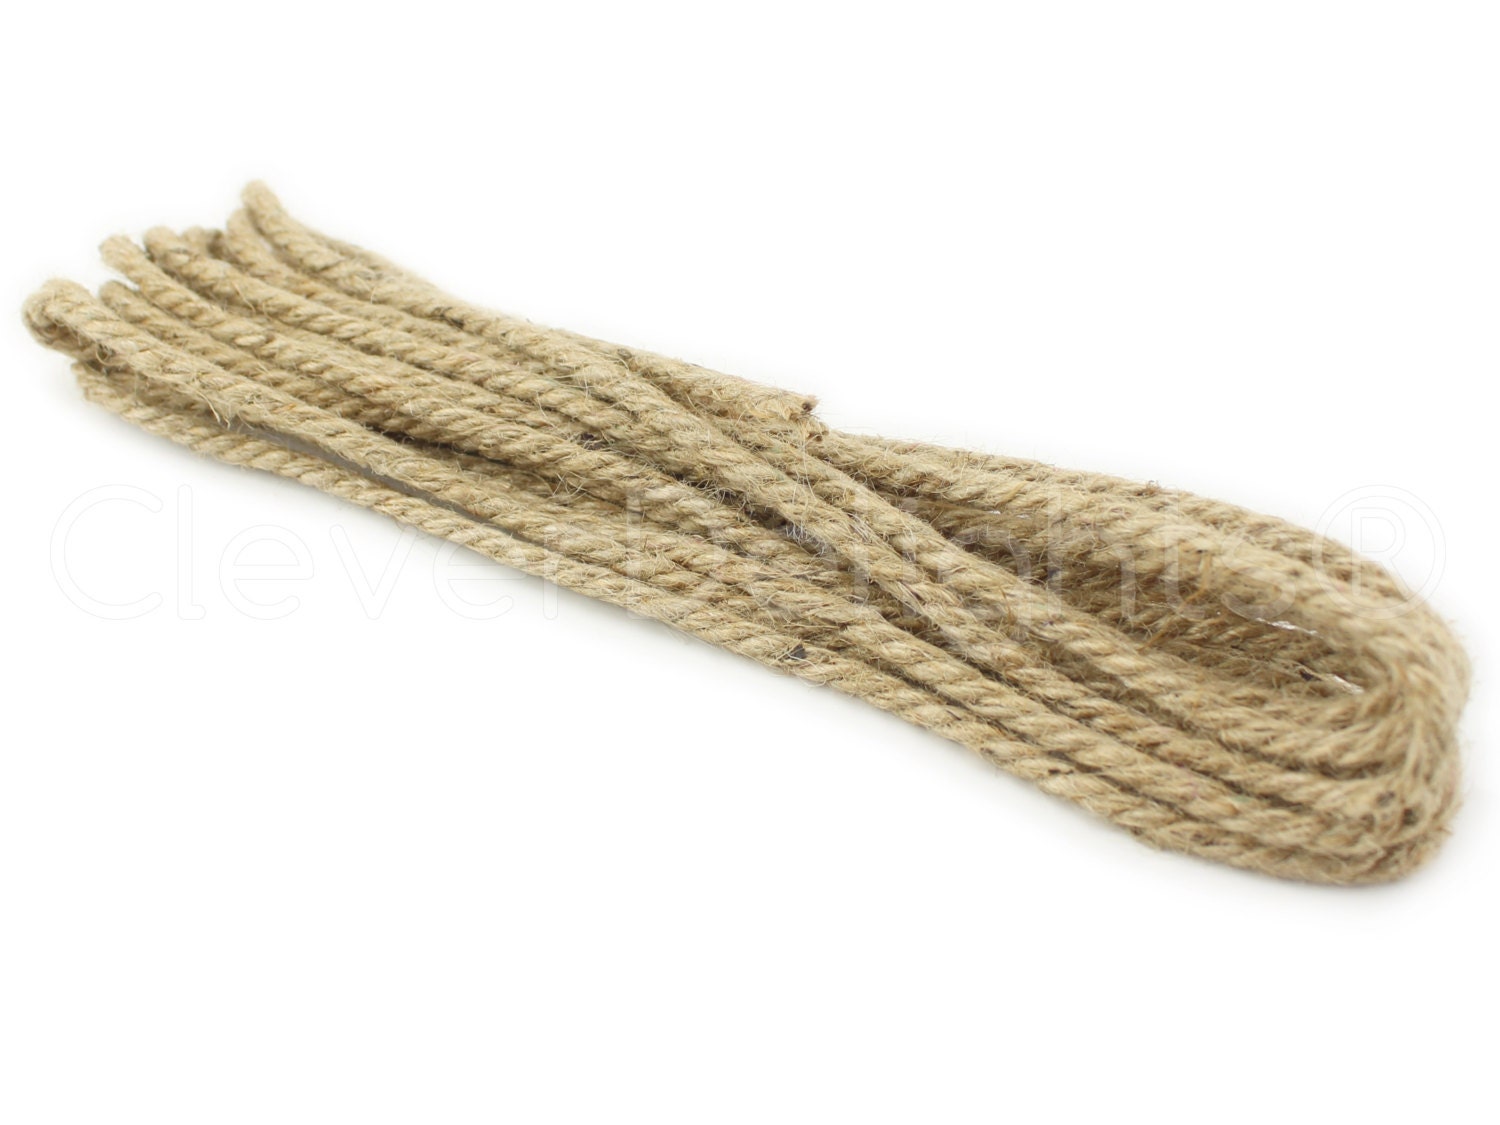 Cleverdelights Premium Jute Twine String White 100 yards Made in